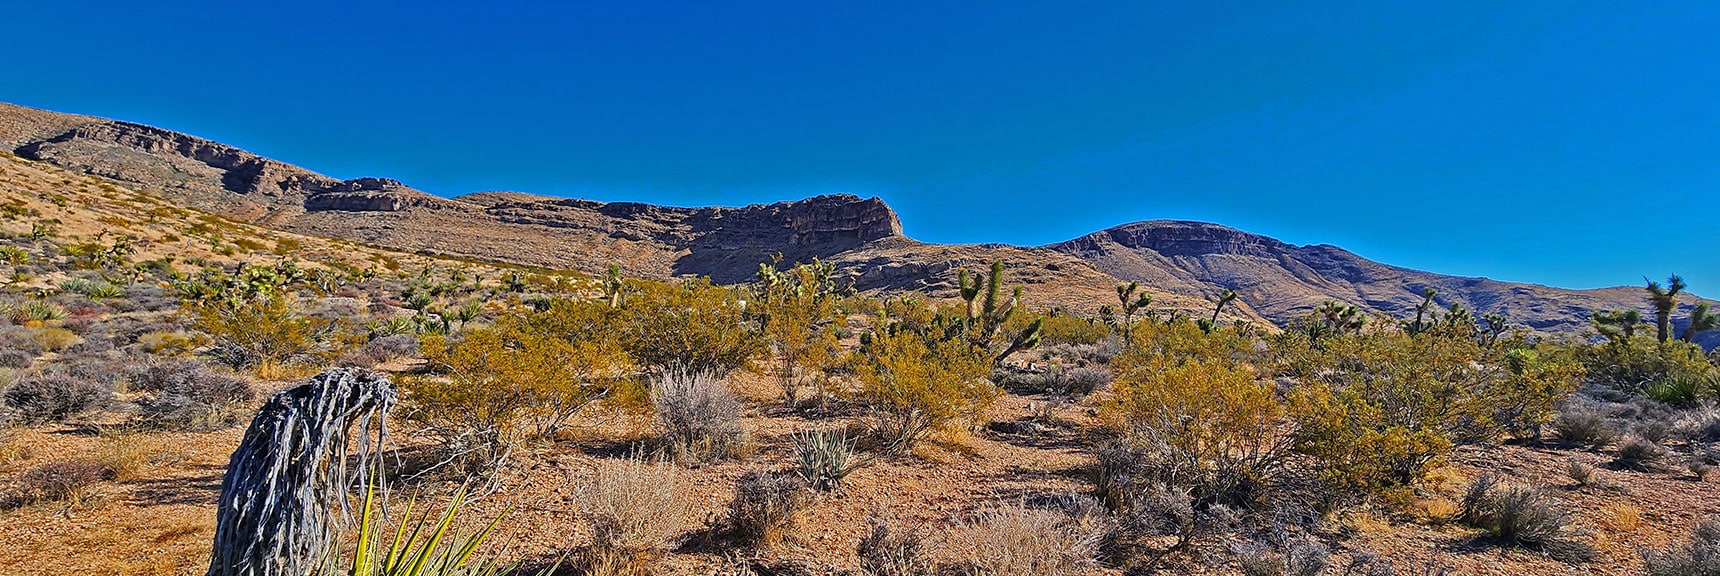 South Edge of Mule Spring Canyon. Final Western Canyon is Just South (to right) | Landmark Bluff Circuit | Lovell Canyon, Nevada